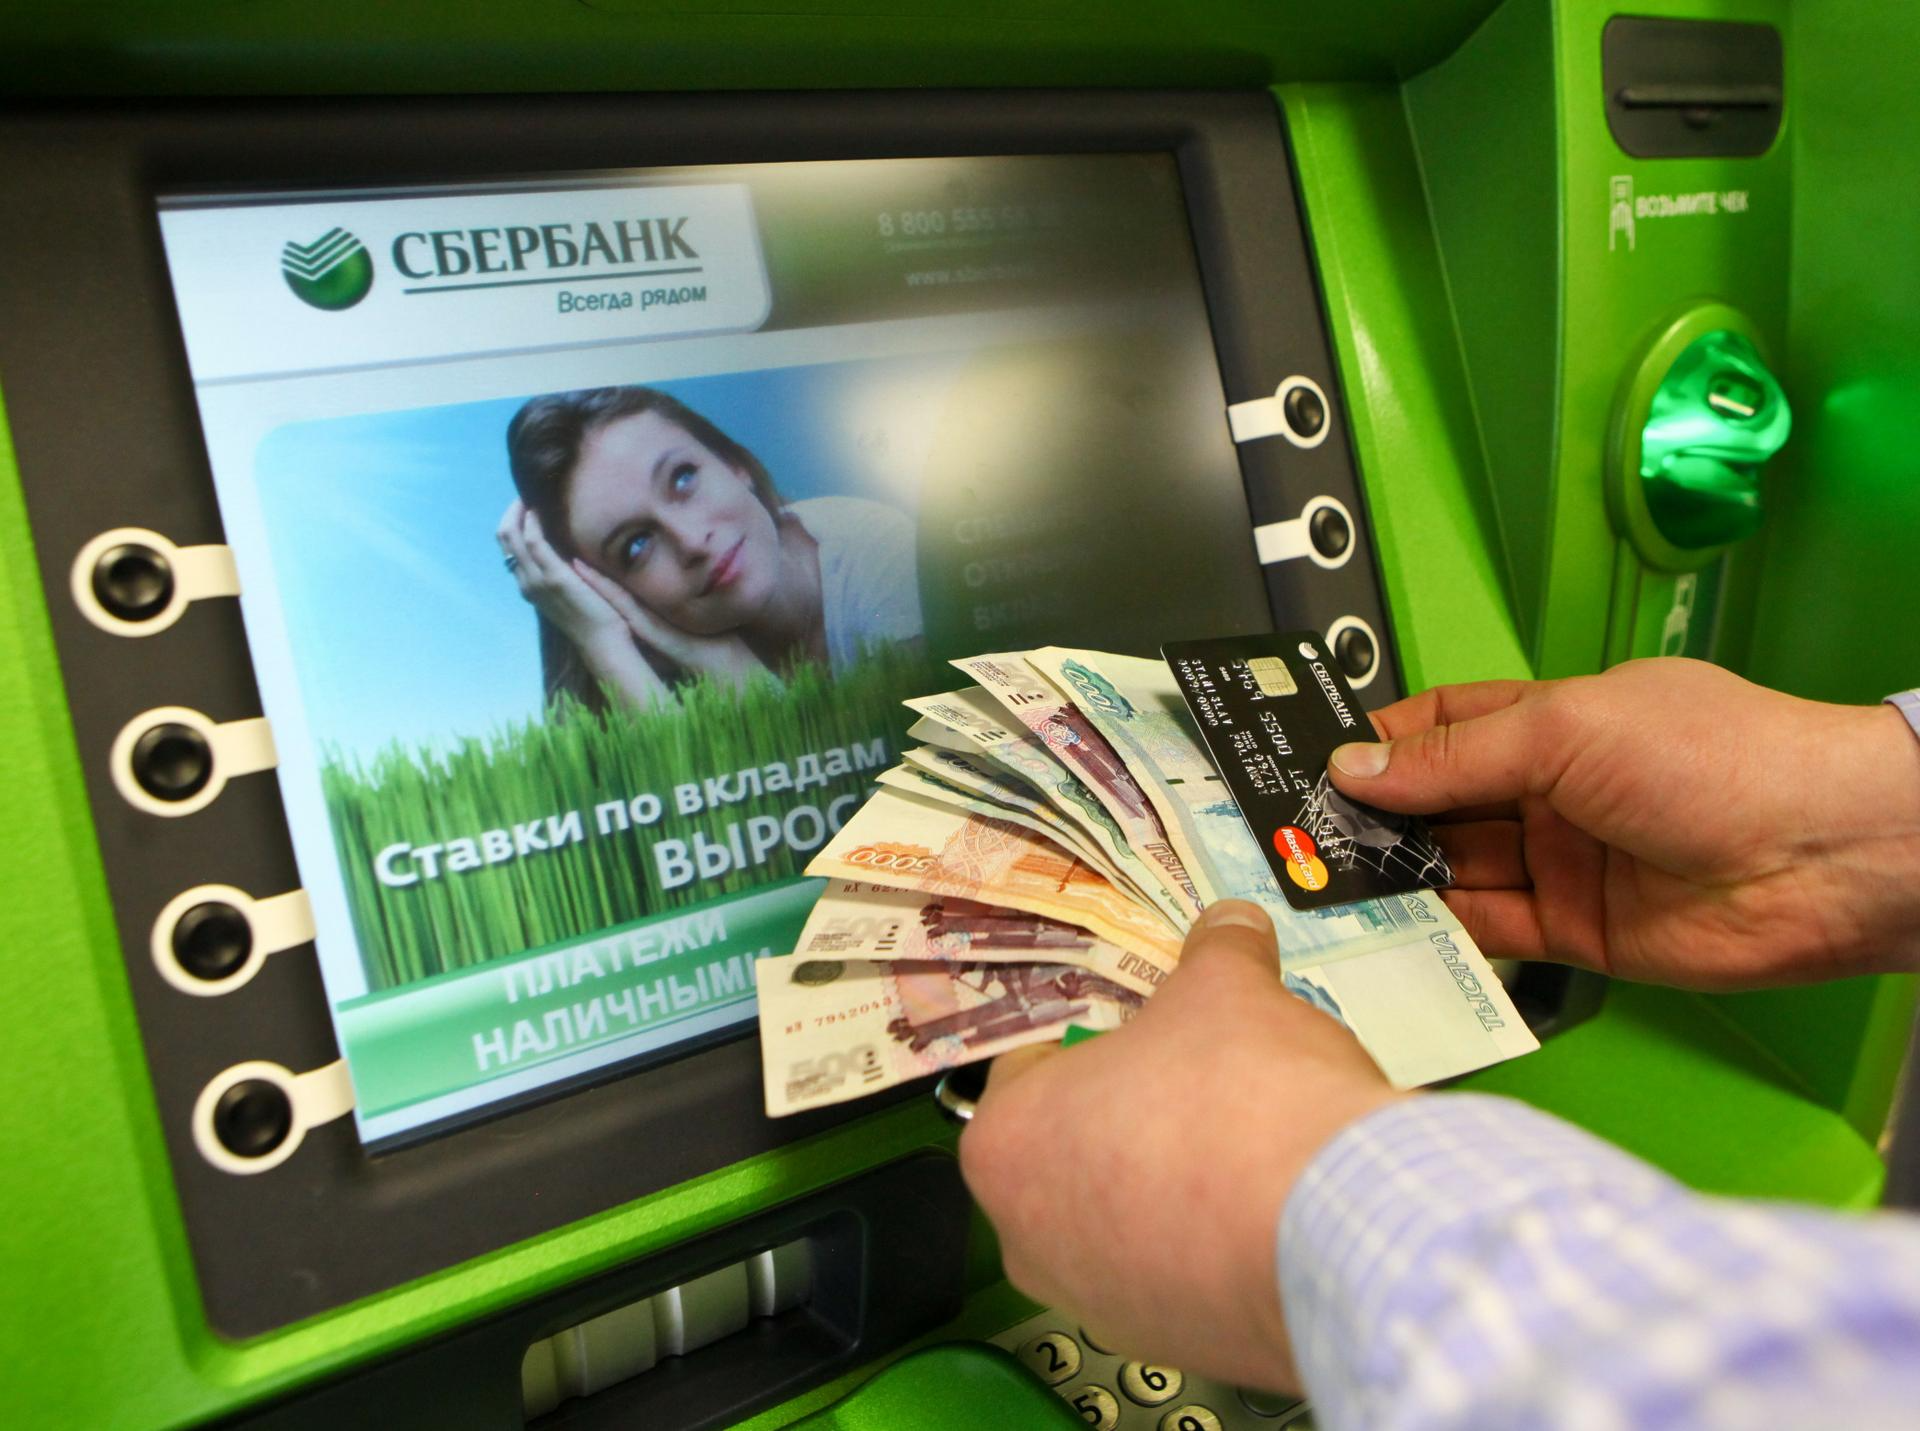 Now only through Sberbank online: Sber has disabled transfers to other banks at ATMs